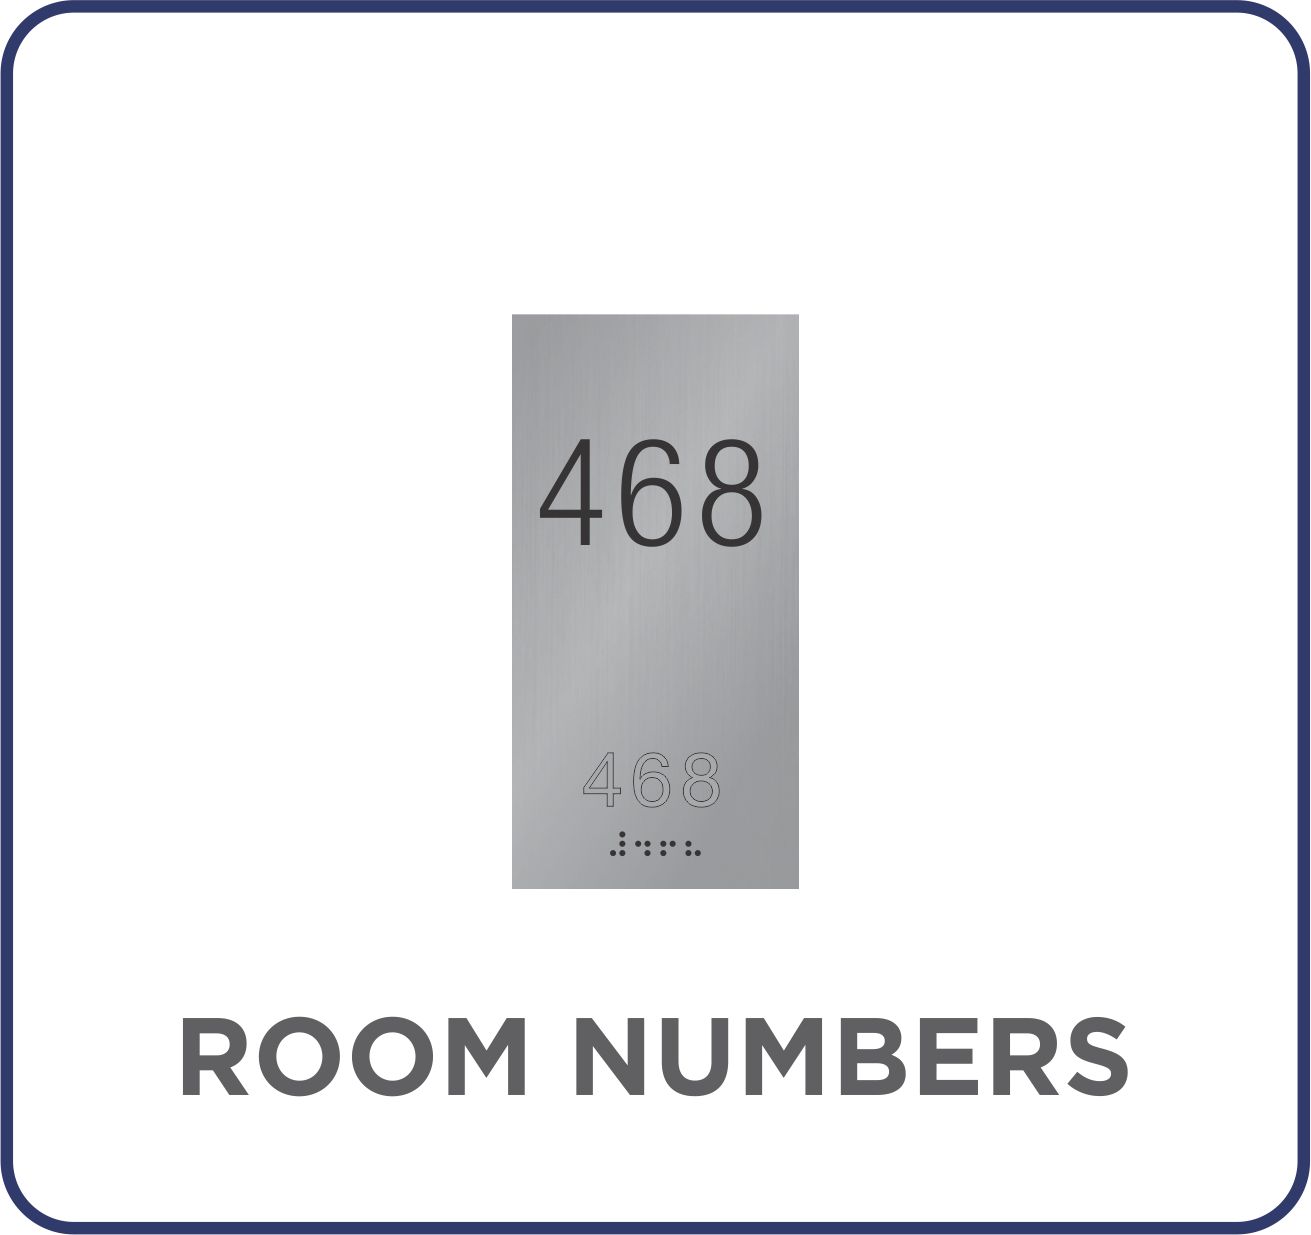 Cambria Room Numbers